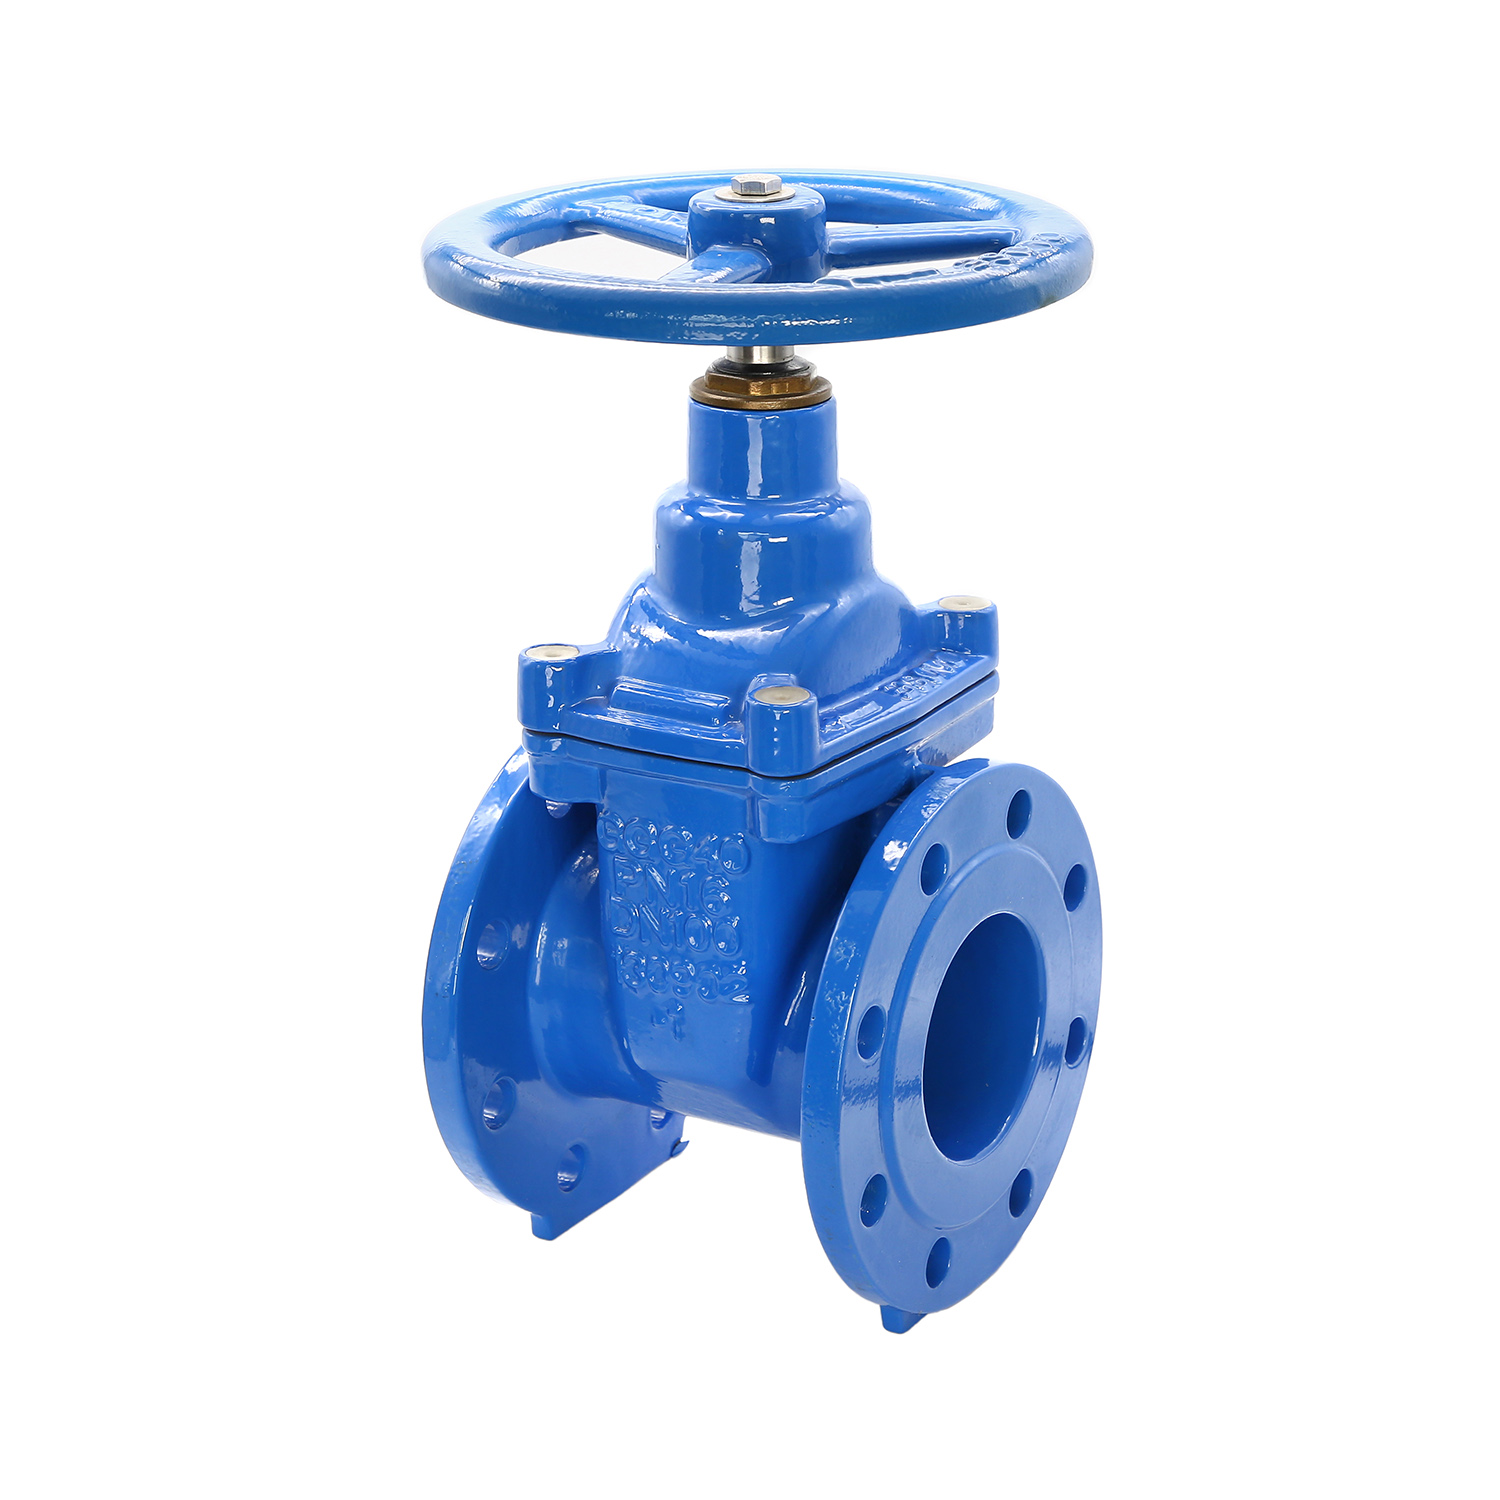 16.Soft seal ( resilient seat) gate valve